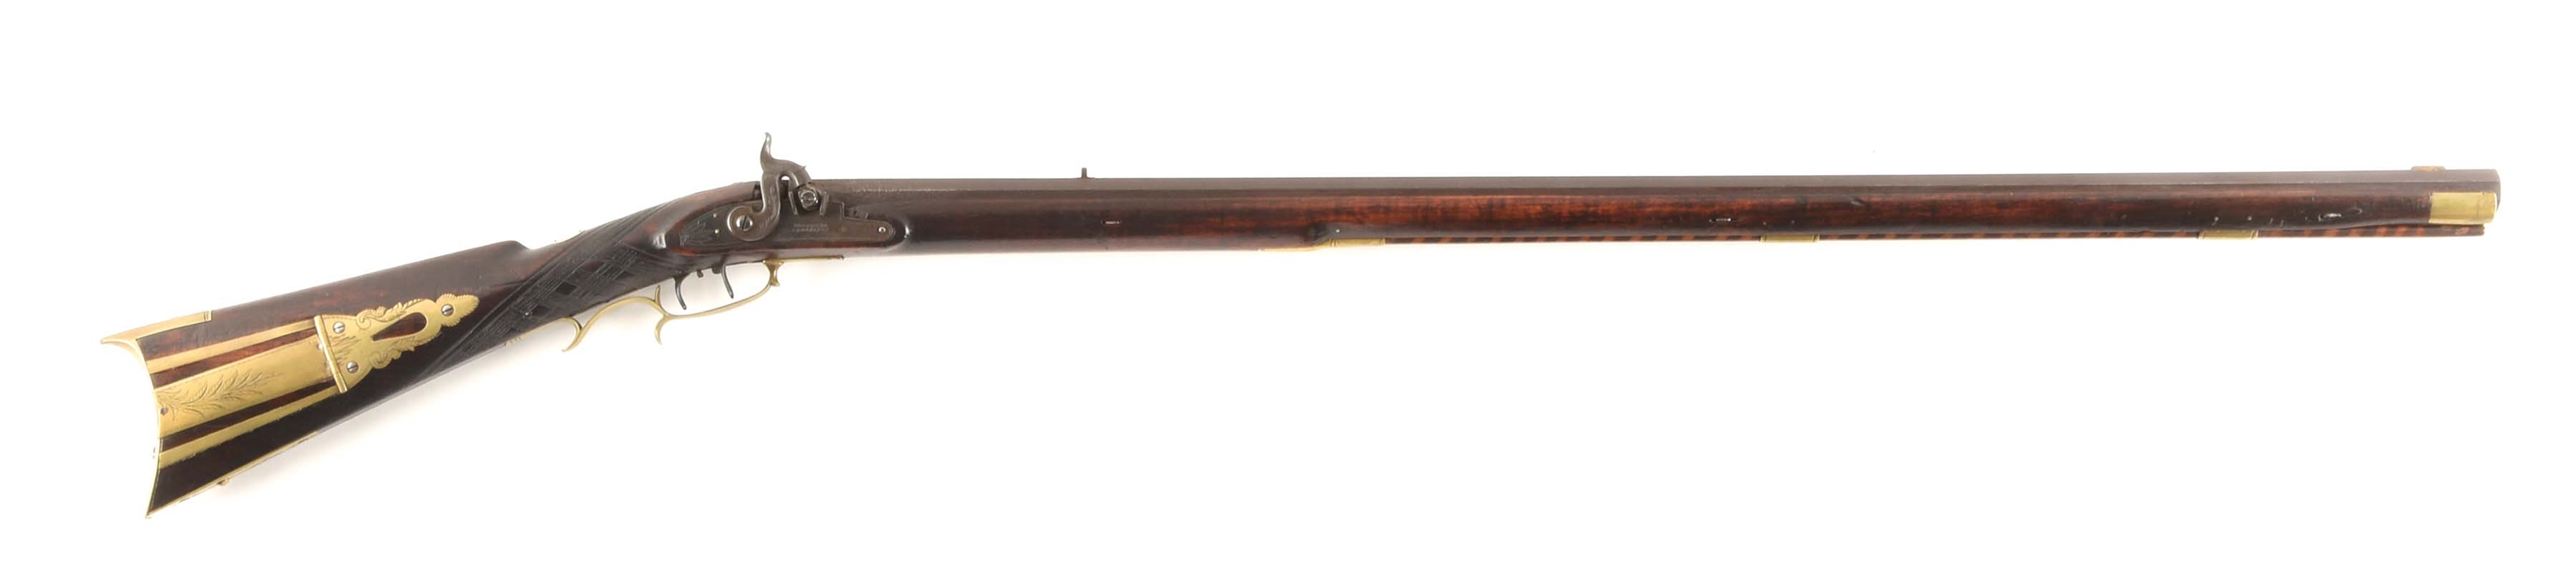 (A) FULL STOCK HENRY DREPPERD LANCASTER COUNTY PERCUSSION LONG RIFLE.